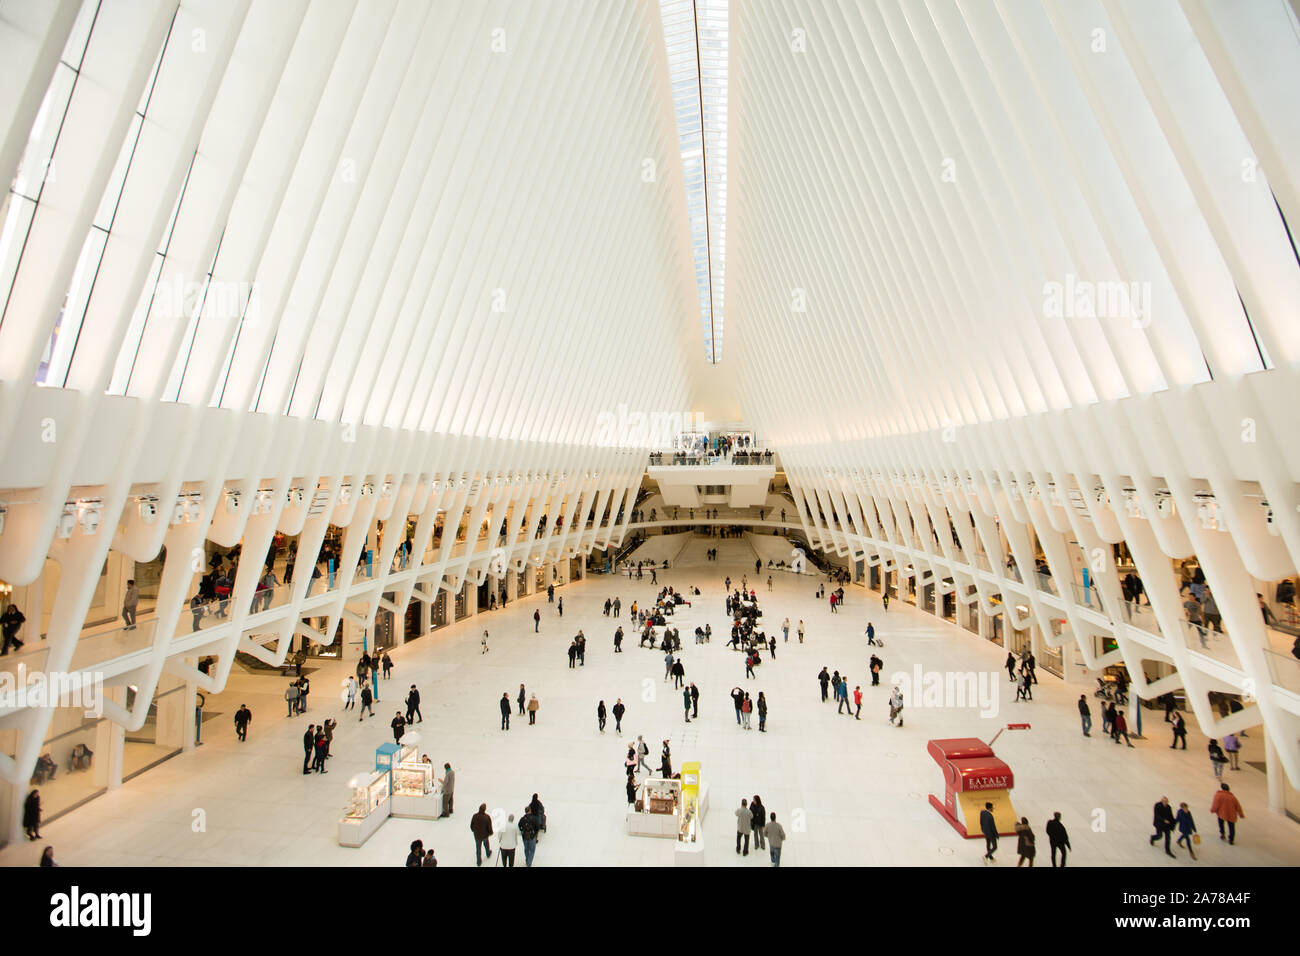 The interior of the Oculus, the landmark building for the New York's Port Authority Transportation Hub, at the World Trade Center Stock Photo